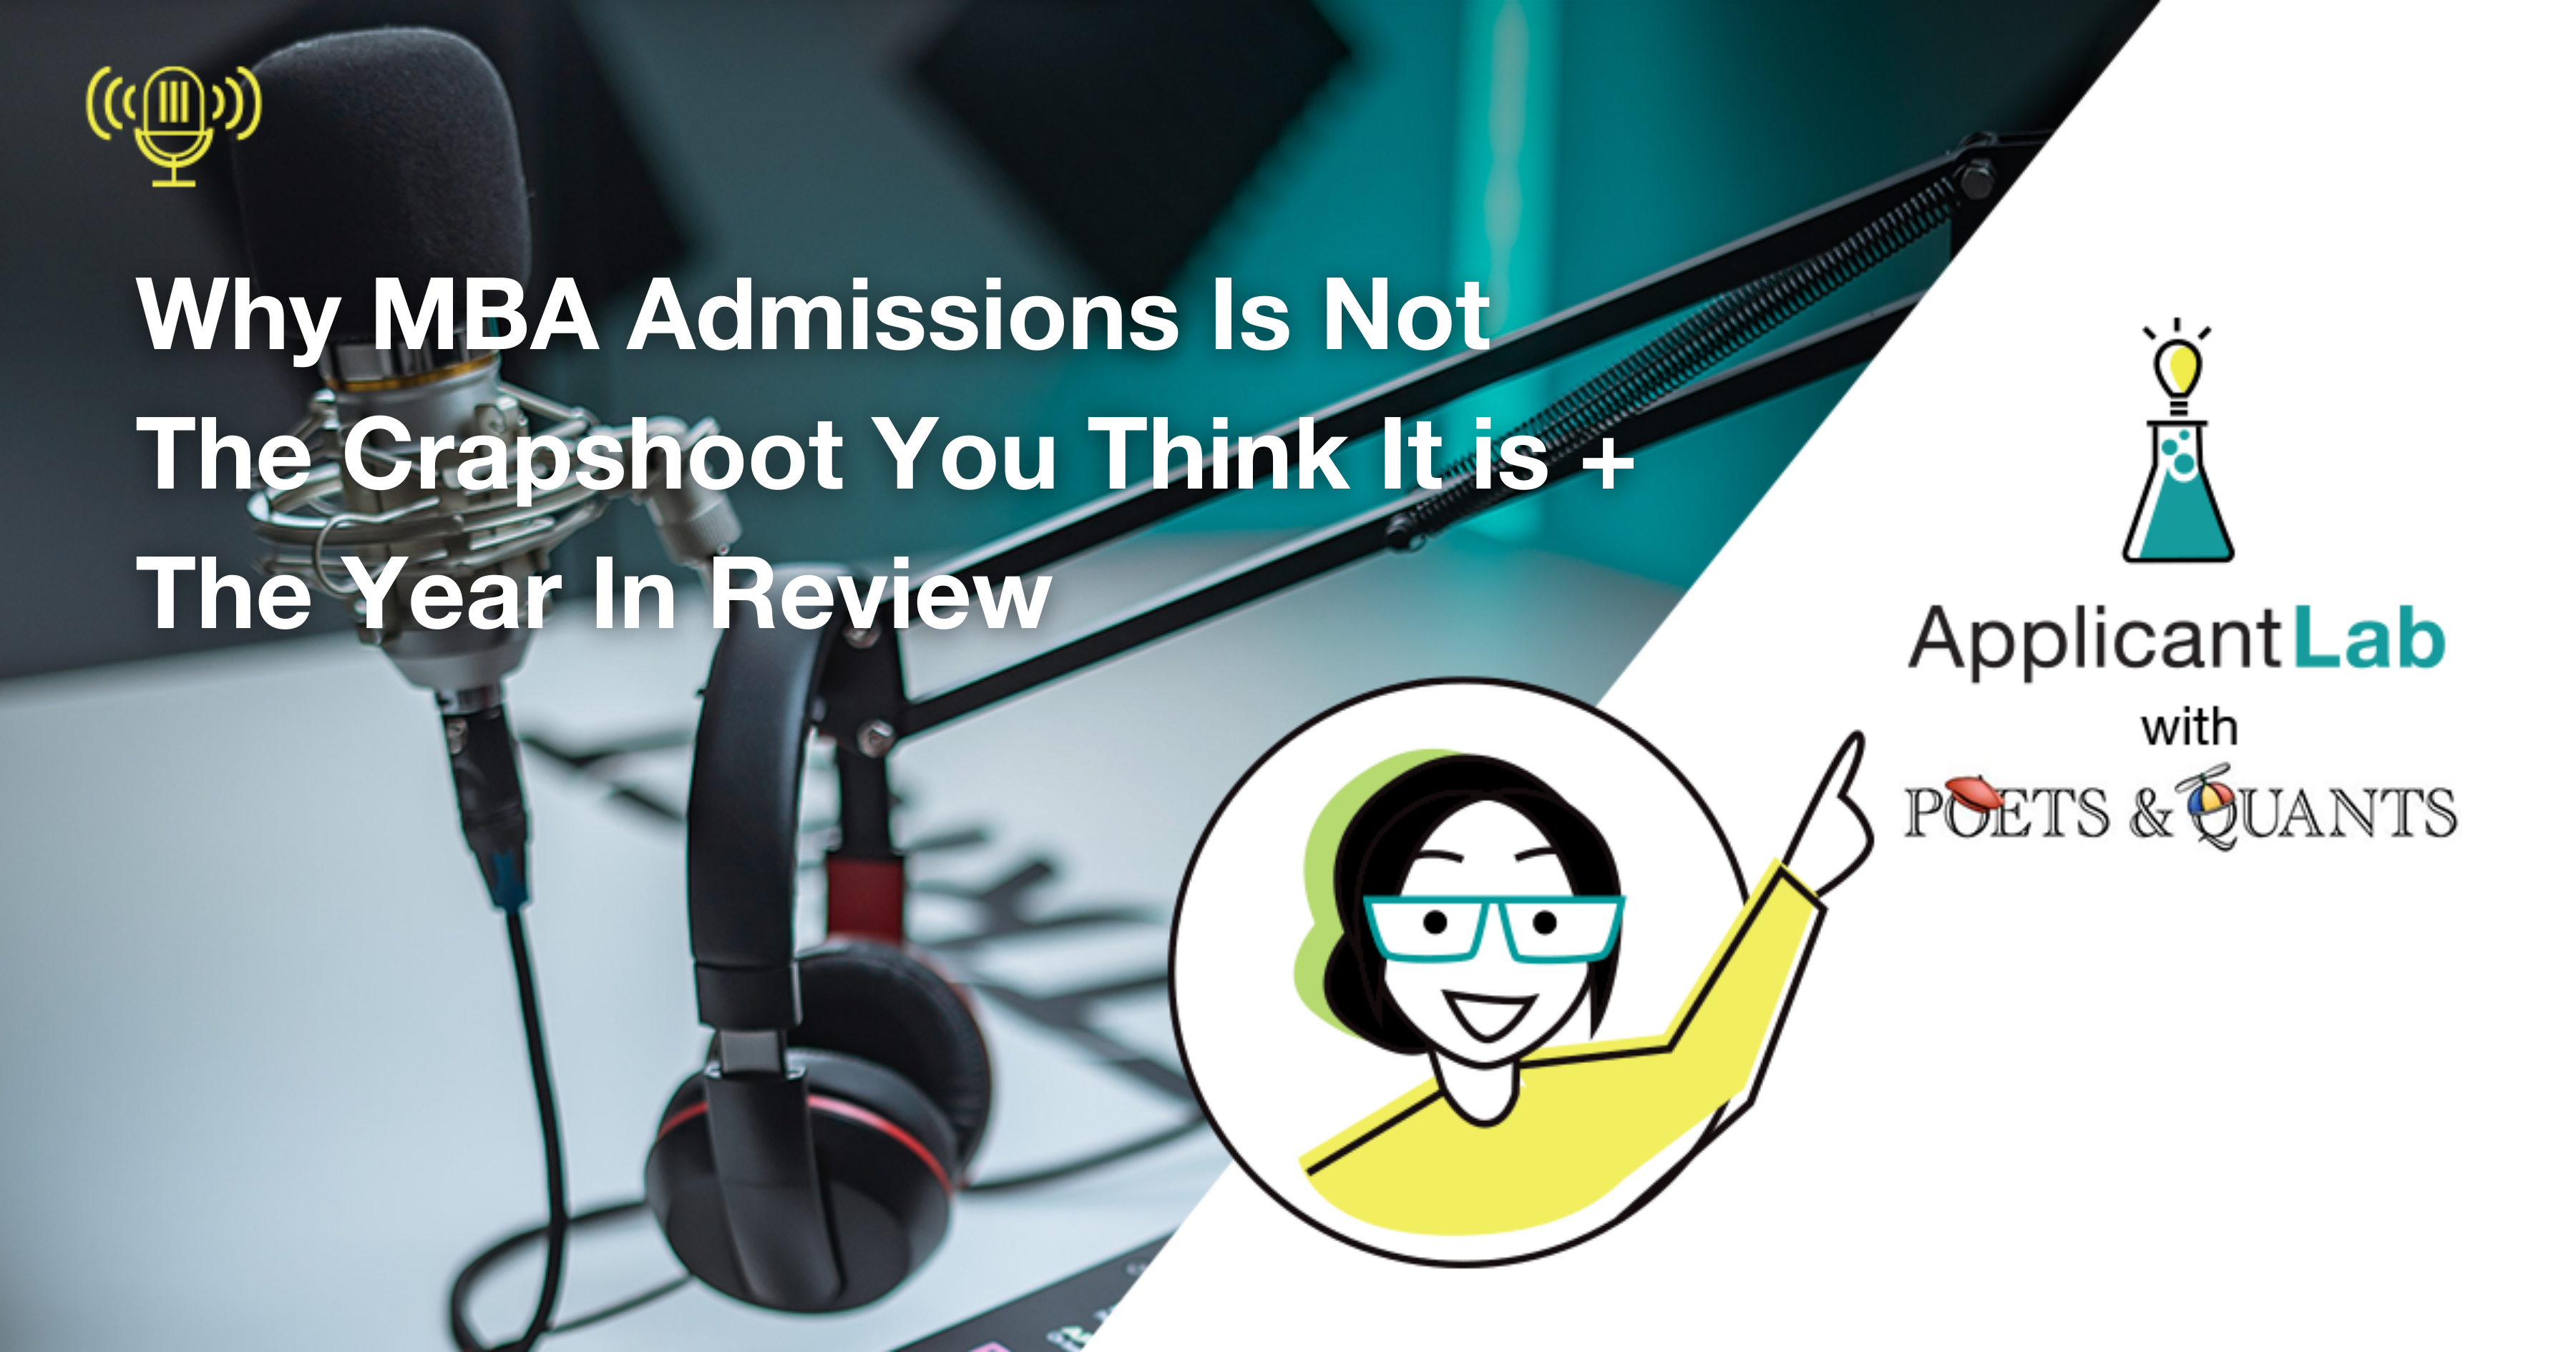 Why MBA Admissions Is Not The Crapshoot You Think It is + The Year In Review